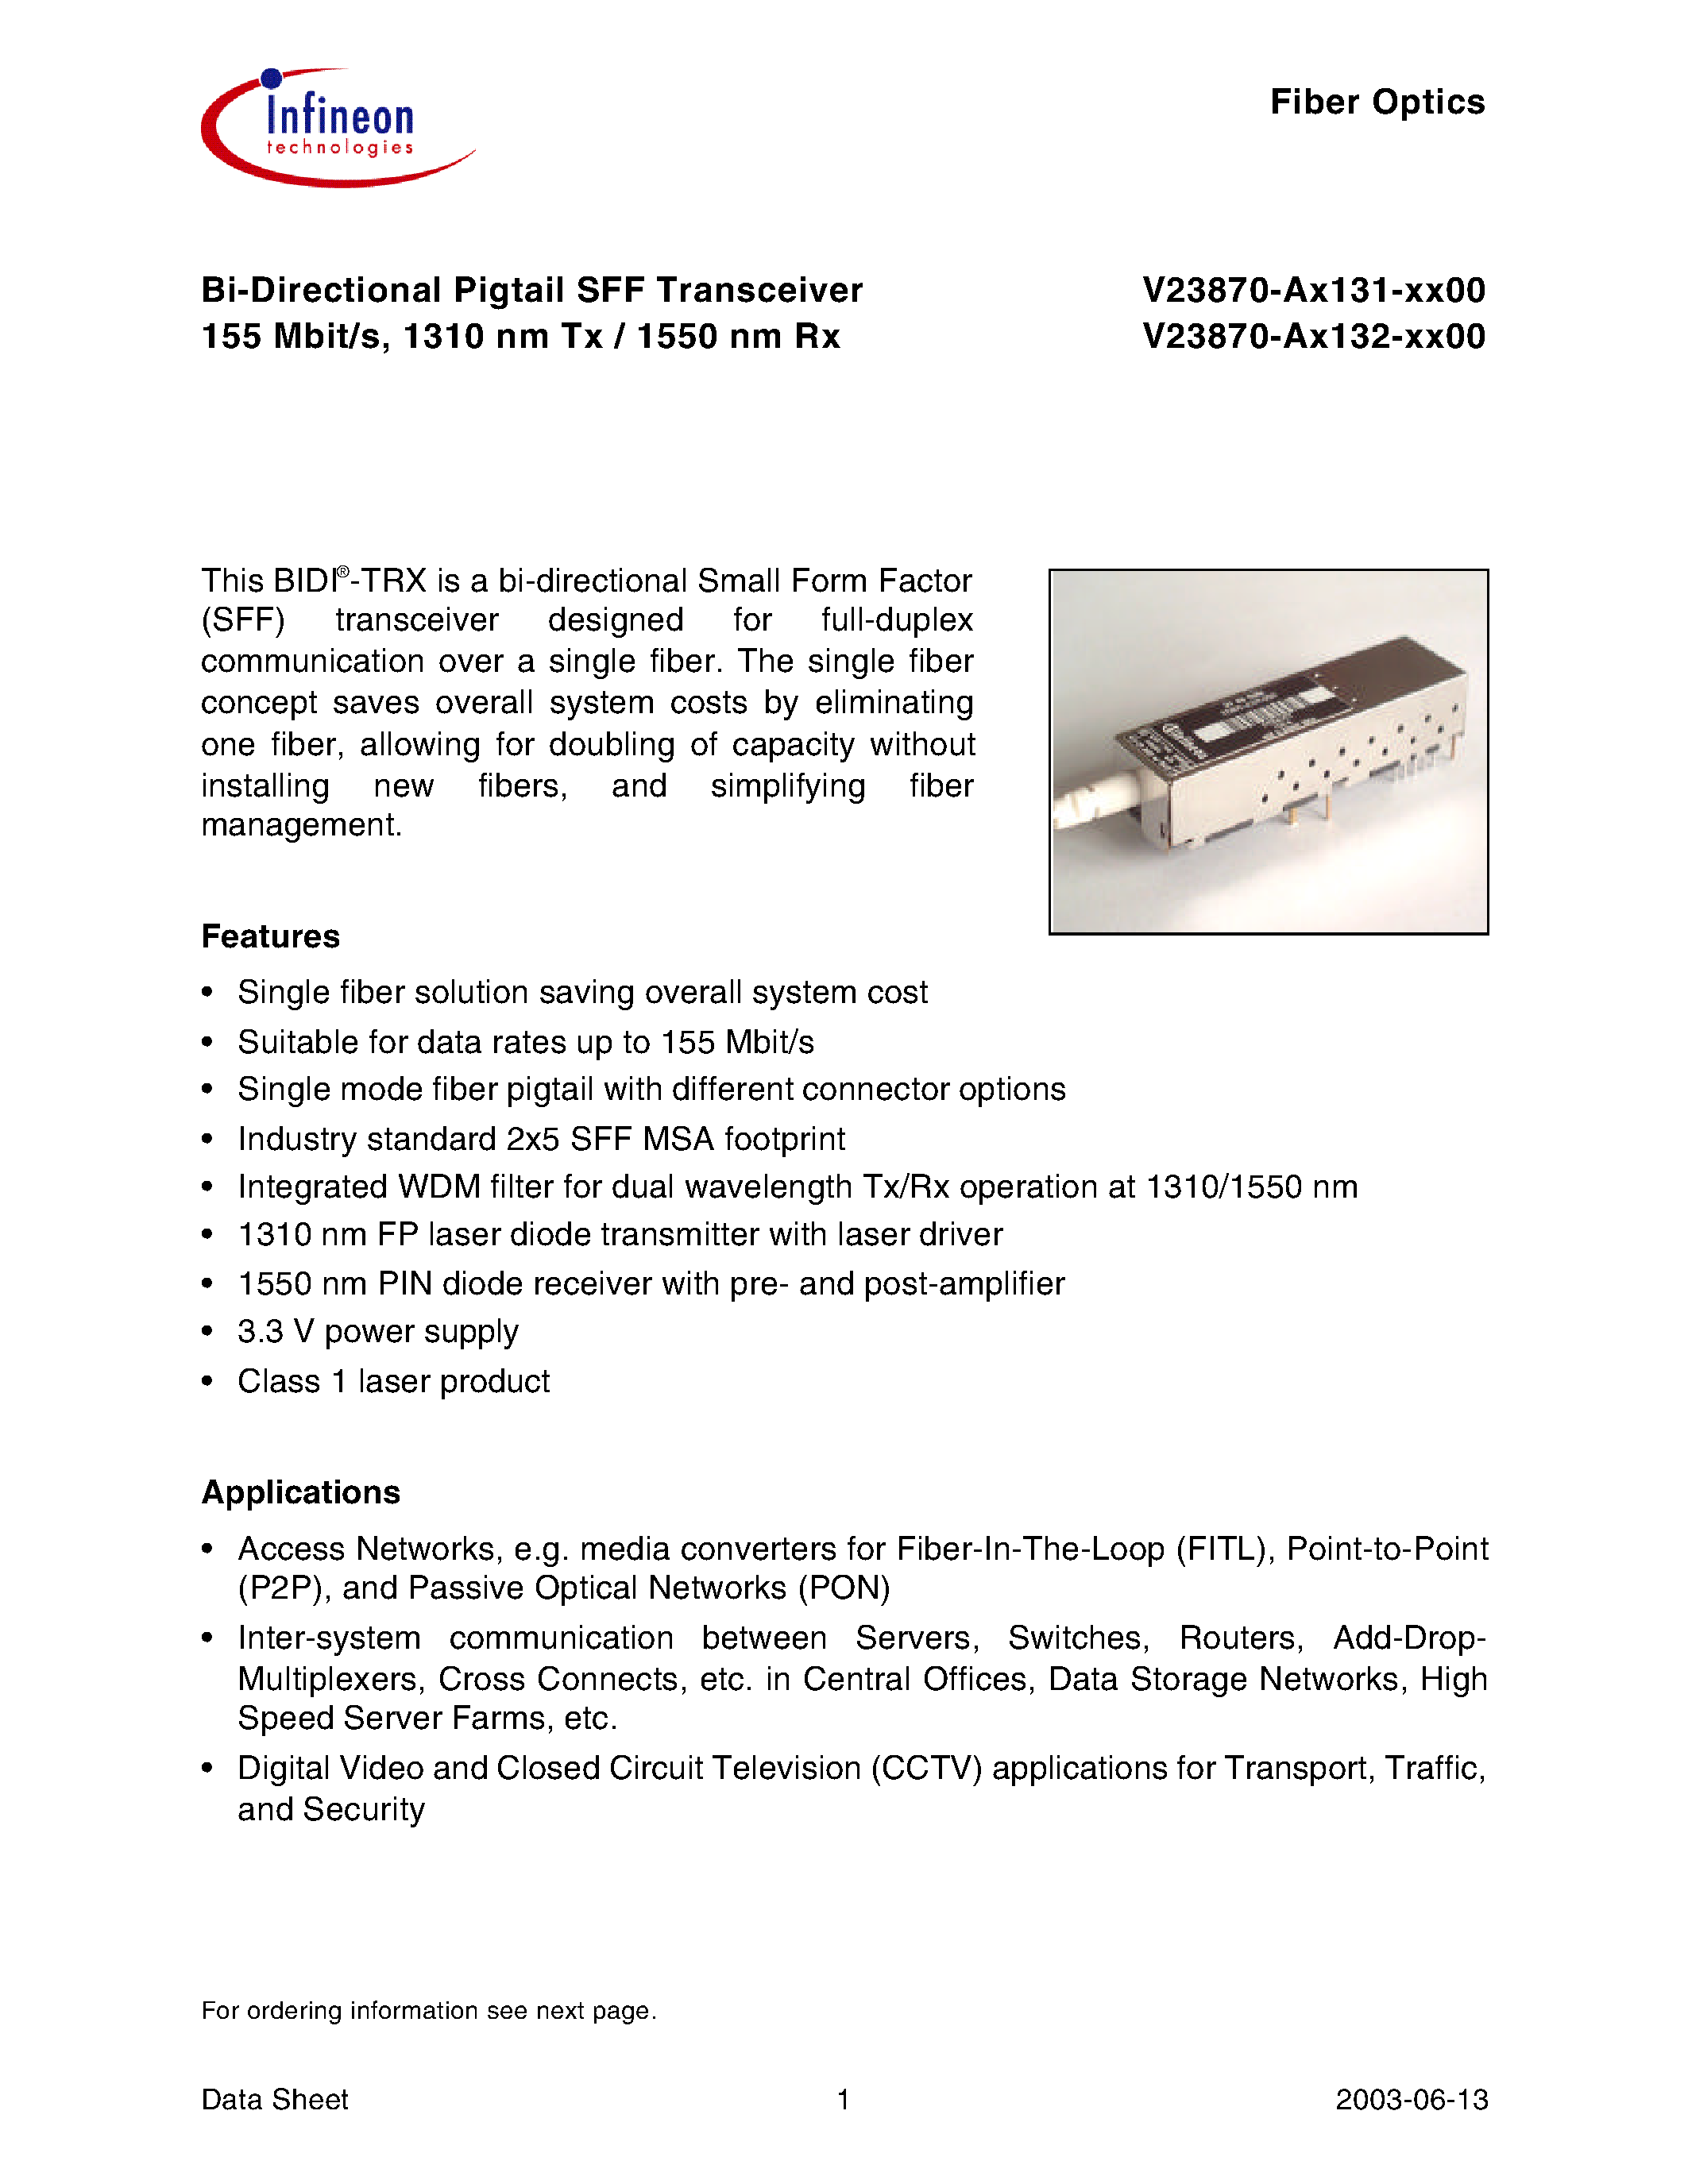 Datasheet V23870-A1132-K200 - Bi-Directional Pigtail SFF Transceiver 155 Mbit/s/ 1310 nm Tx / 1550 nm Rx page 1